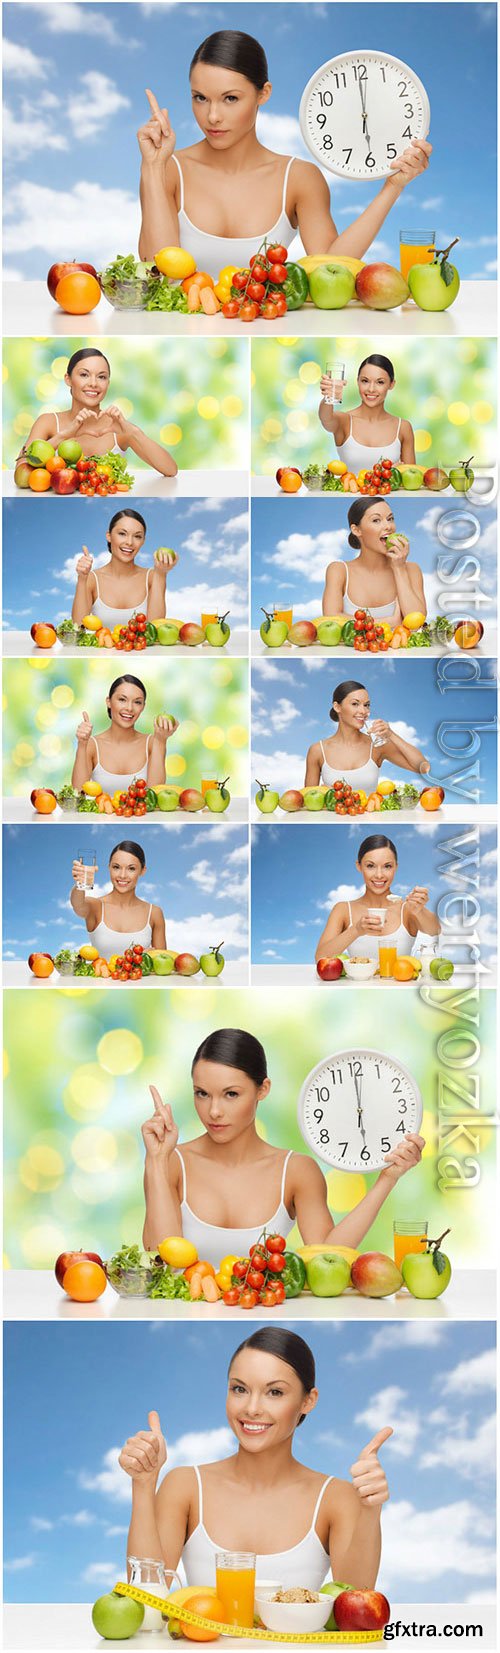 Healthy food concept, girl with fruits and vegetables stock photo